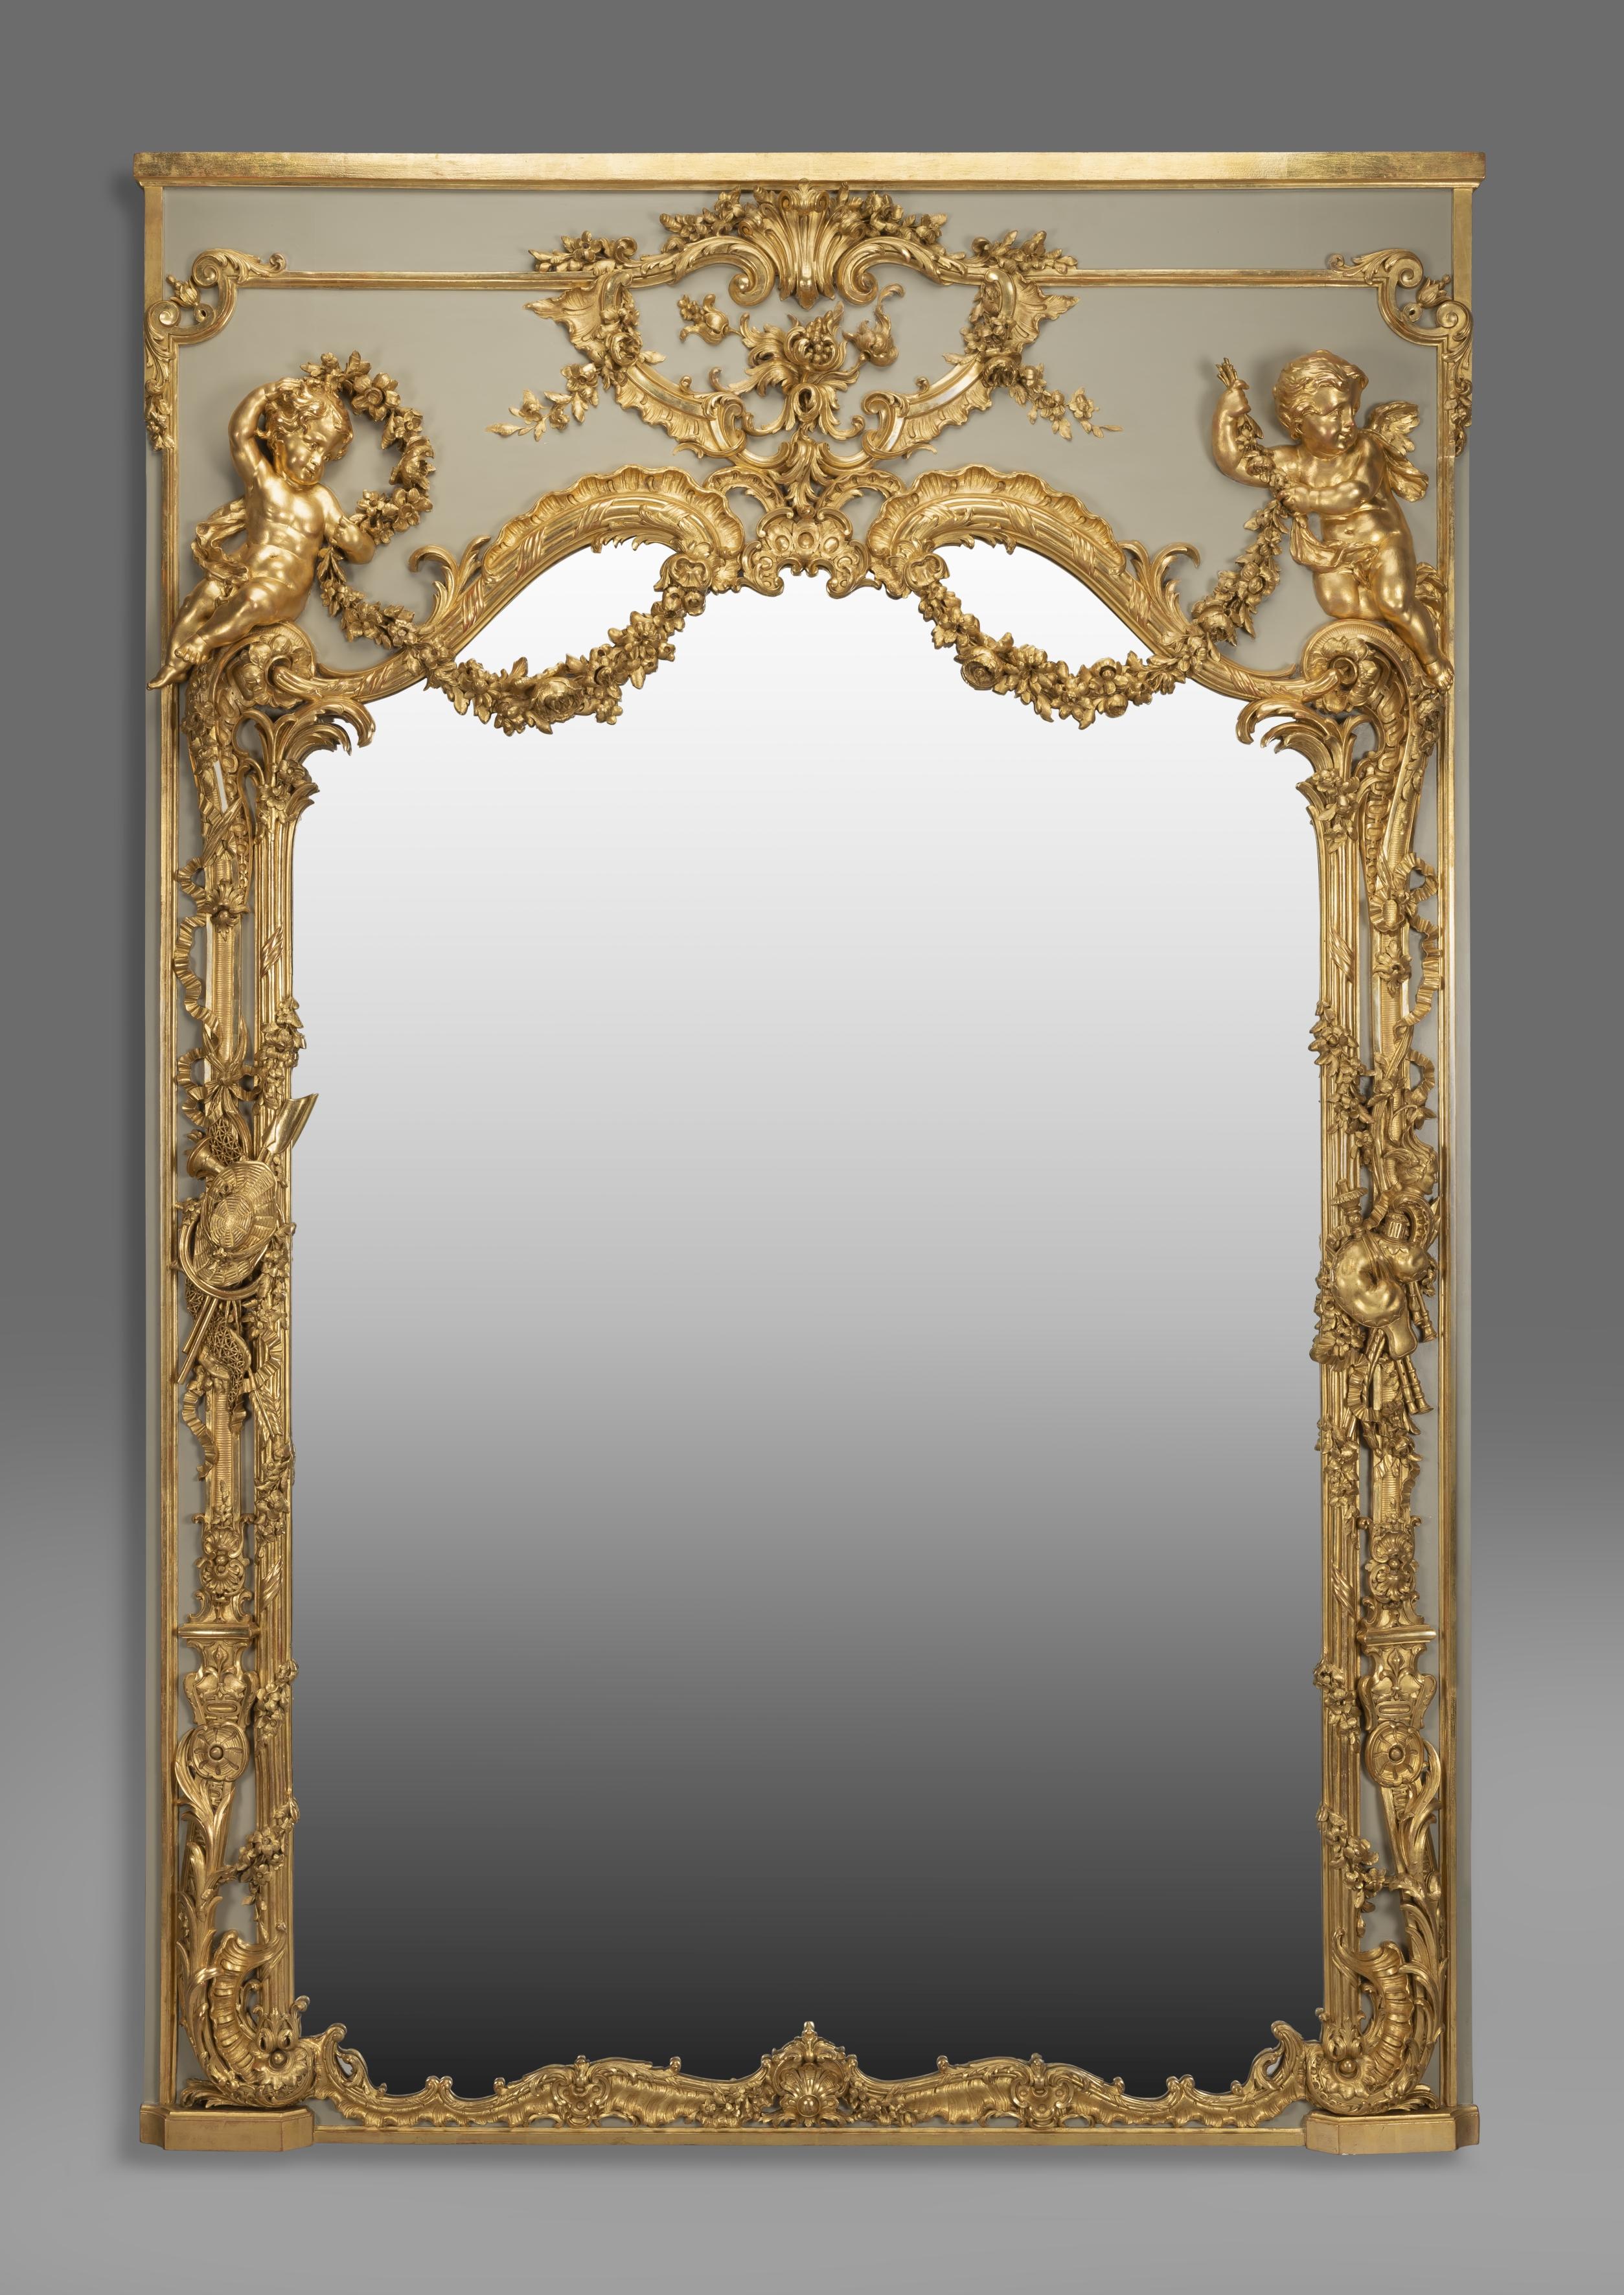 A large and very finely carved Louis XV style parcel-gilt and painted trumeau mirror.

French, circa 1890. 

This exceptional and very rare trumeau mirror has an arched mirror plate framed by Rococo style foliate and acanthus carving with,